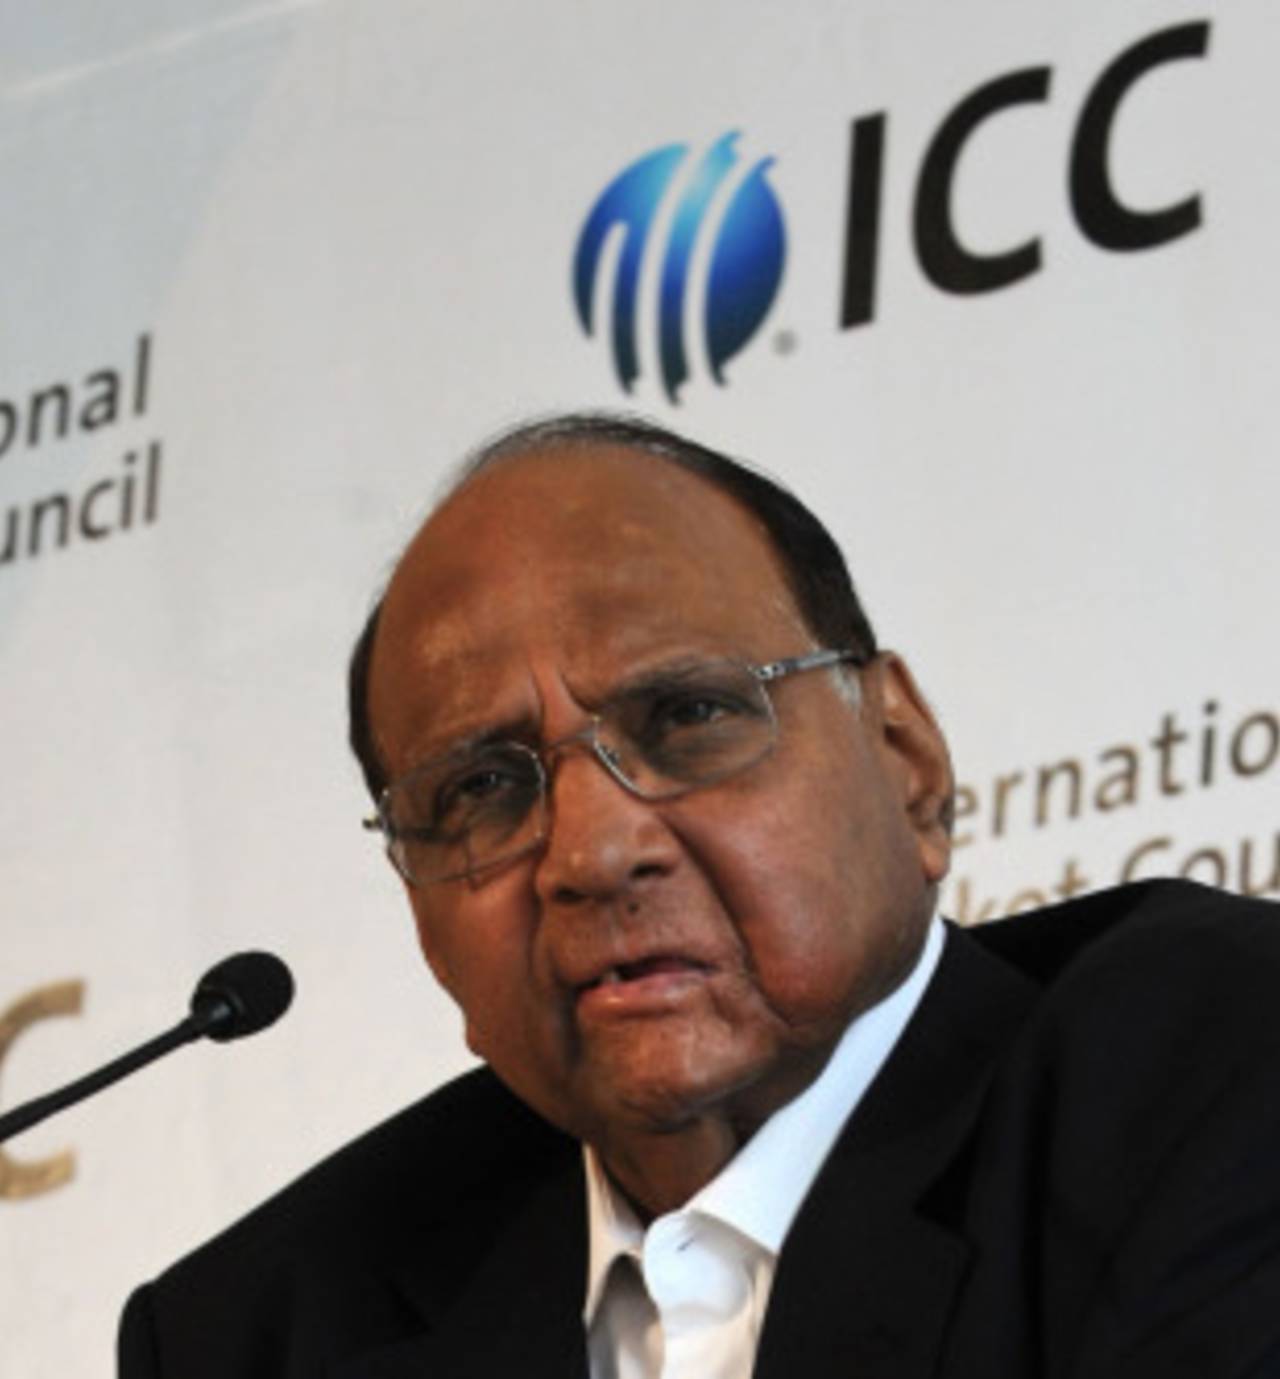 Sharad Pawar addresses the press after being elected as the new ICC president, Singapore, July 1, 2010